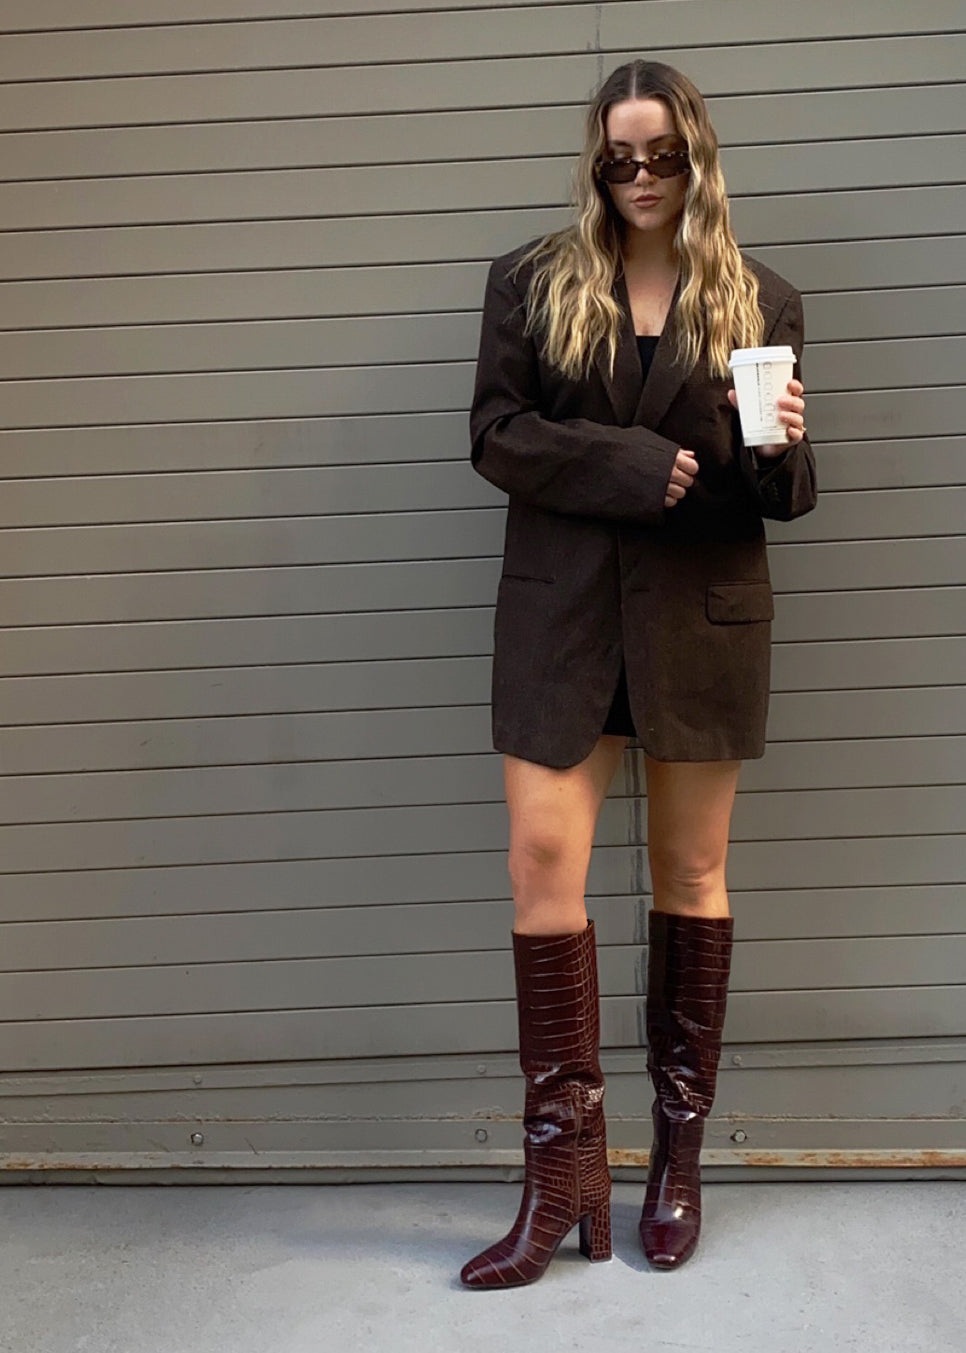 Not sacrificing comfort for style. These are the perfect fall boot!